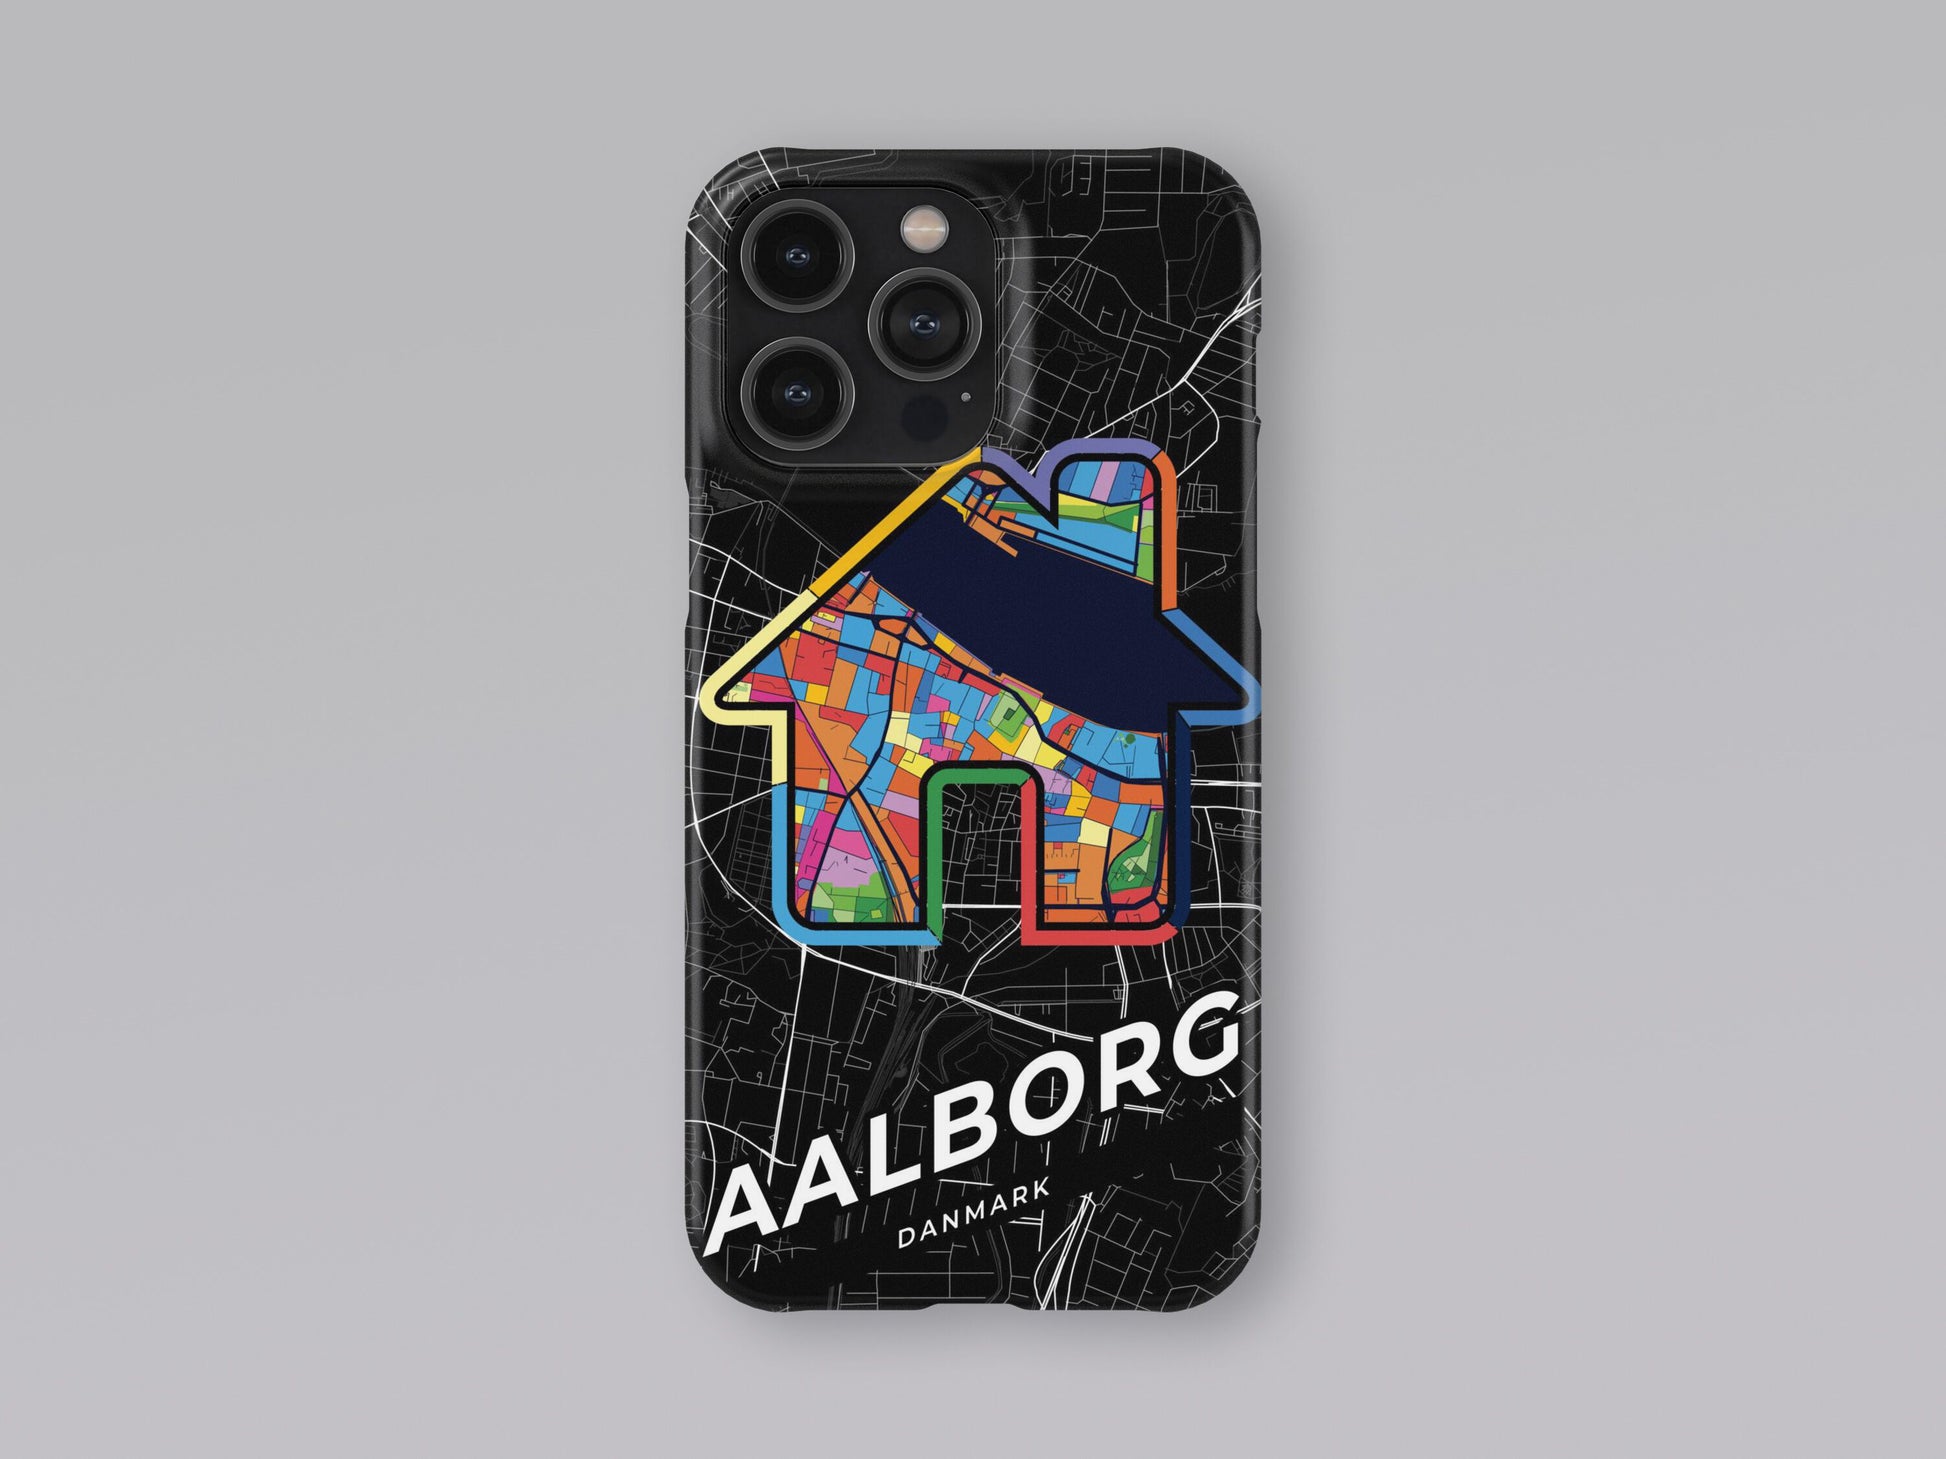 Aalborg Danmark slim phone case with colorful icon. Birthday, wedding or housewarming gift. Couple match cases. 3